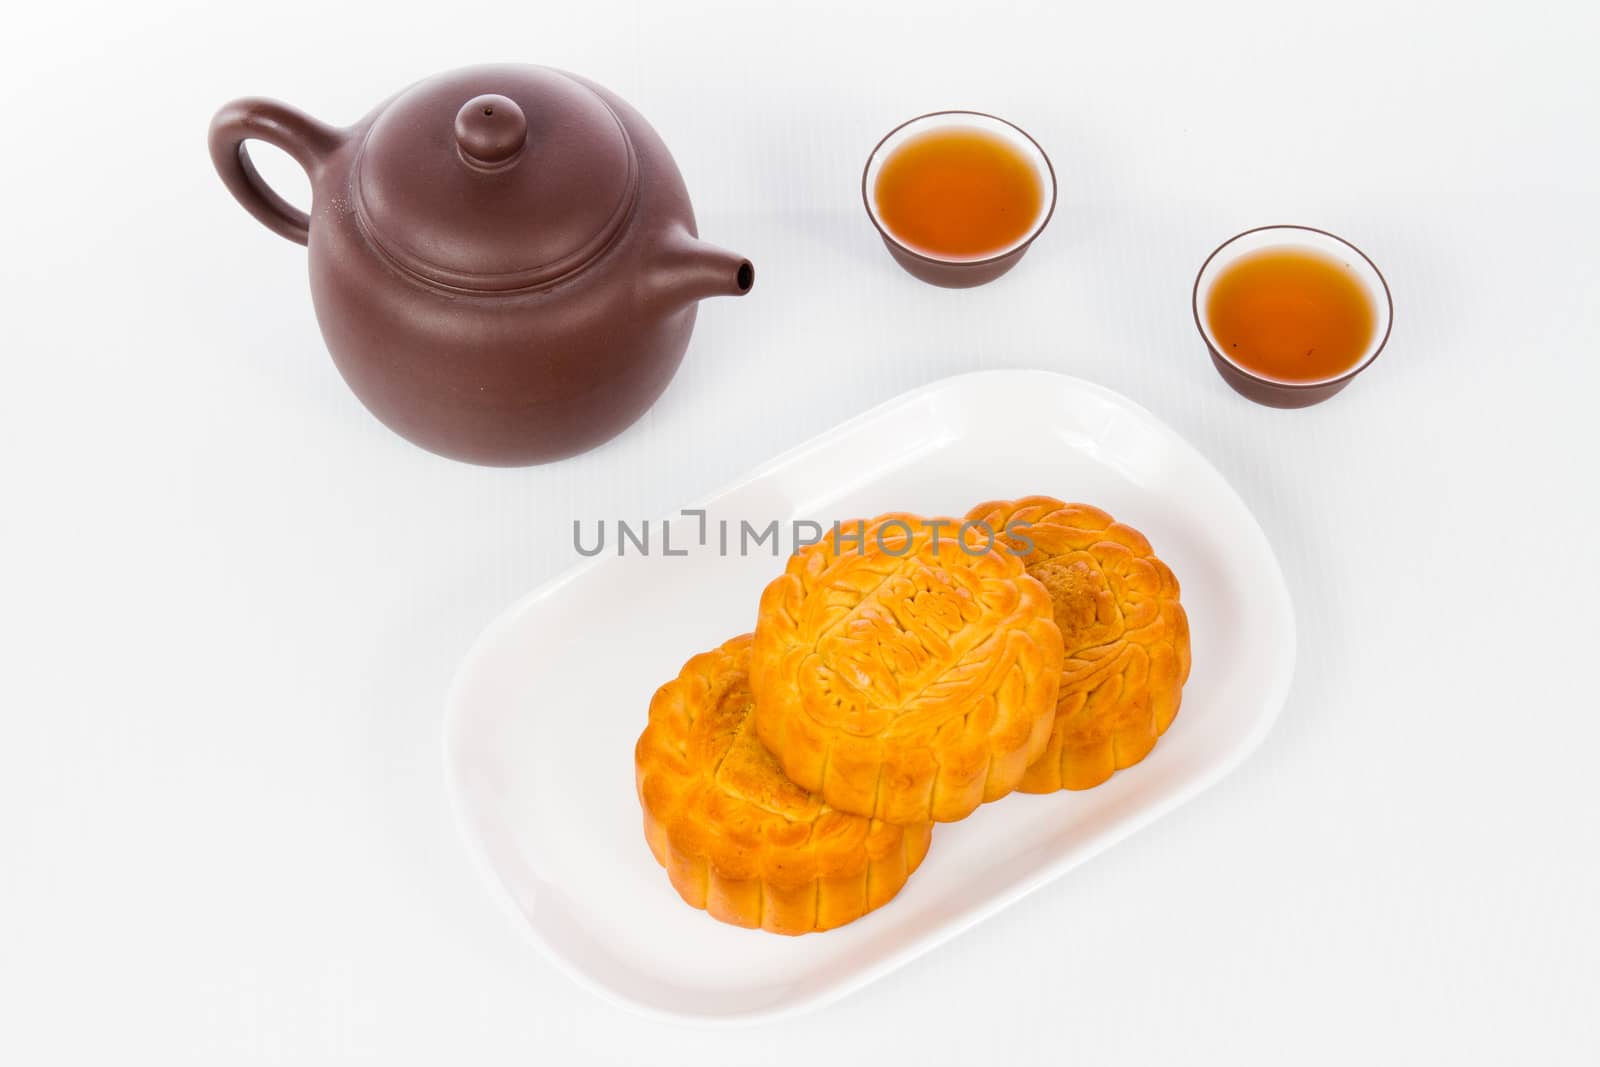 Chinese mid autumn festival with moon cake and tea pot setup in plain white background.